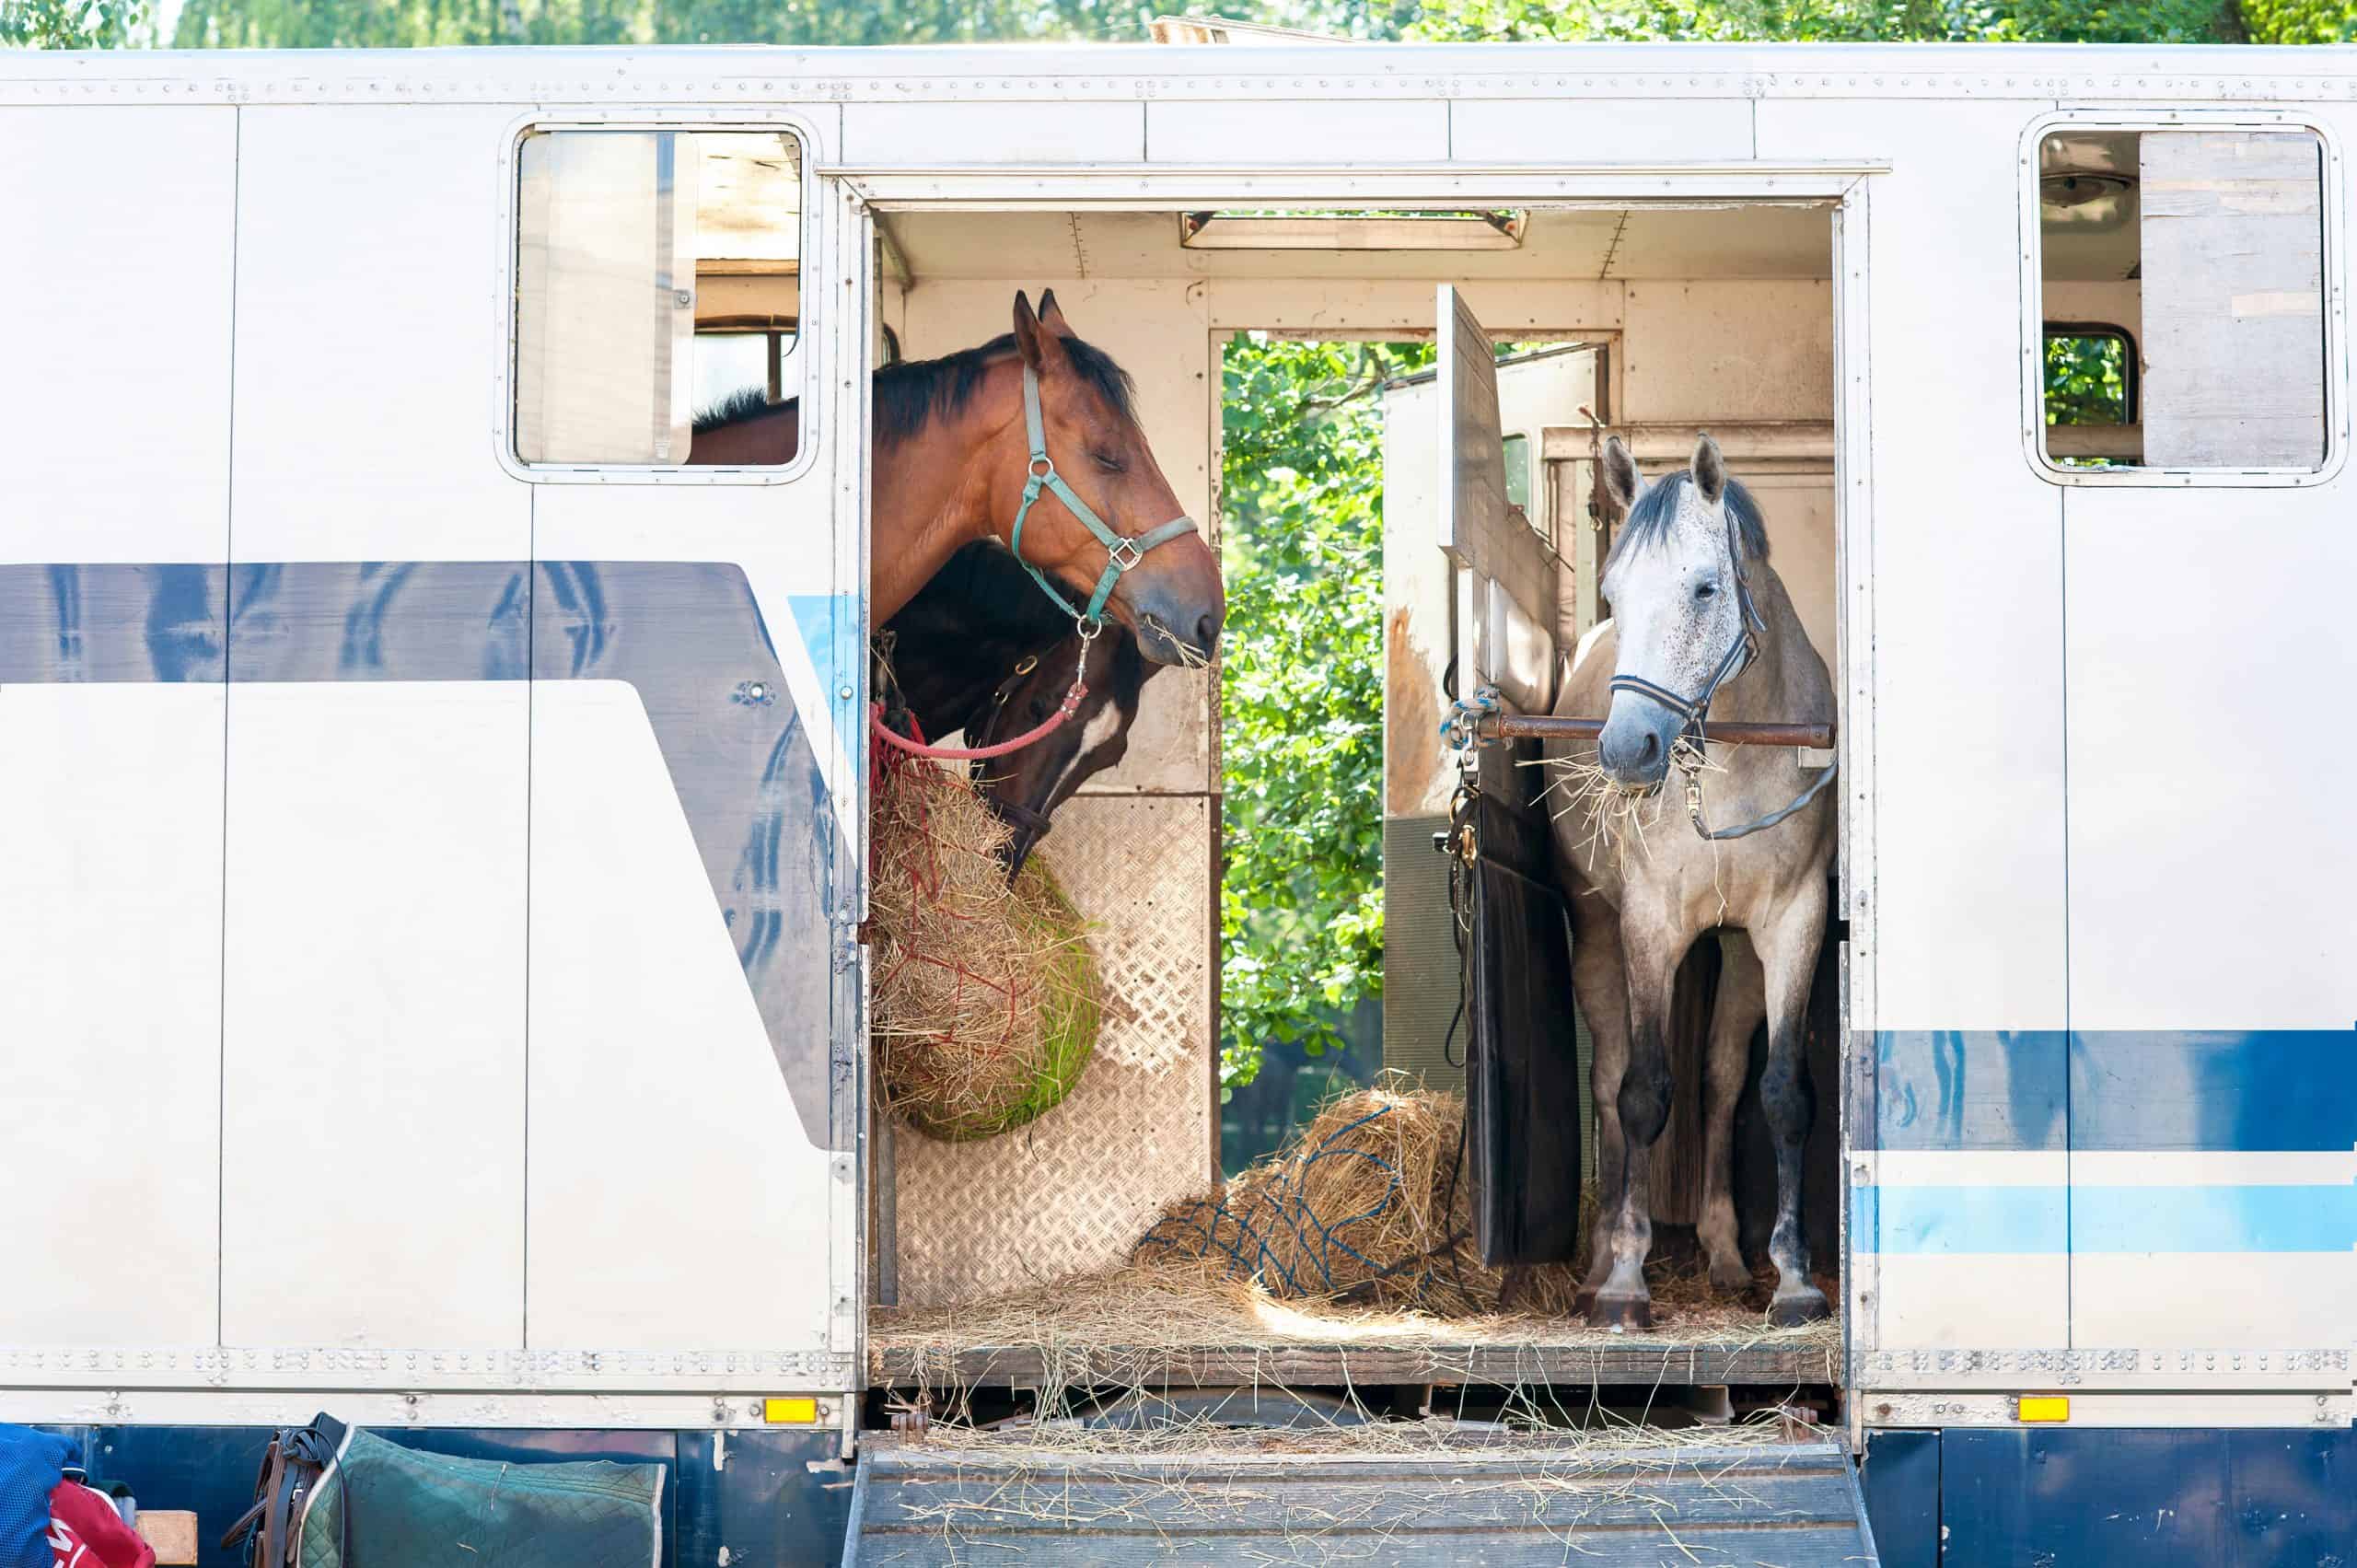 Three horses standing in trailer. View front view. Summertime outdoors horizontal image.